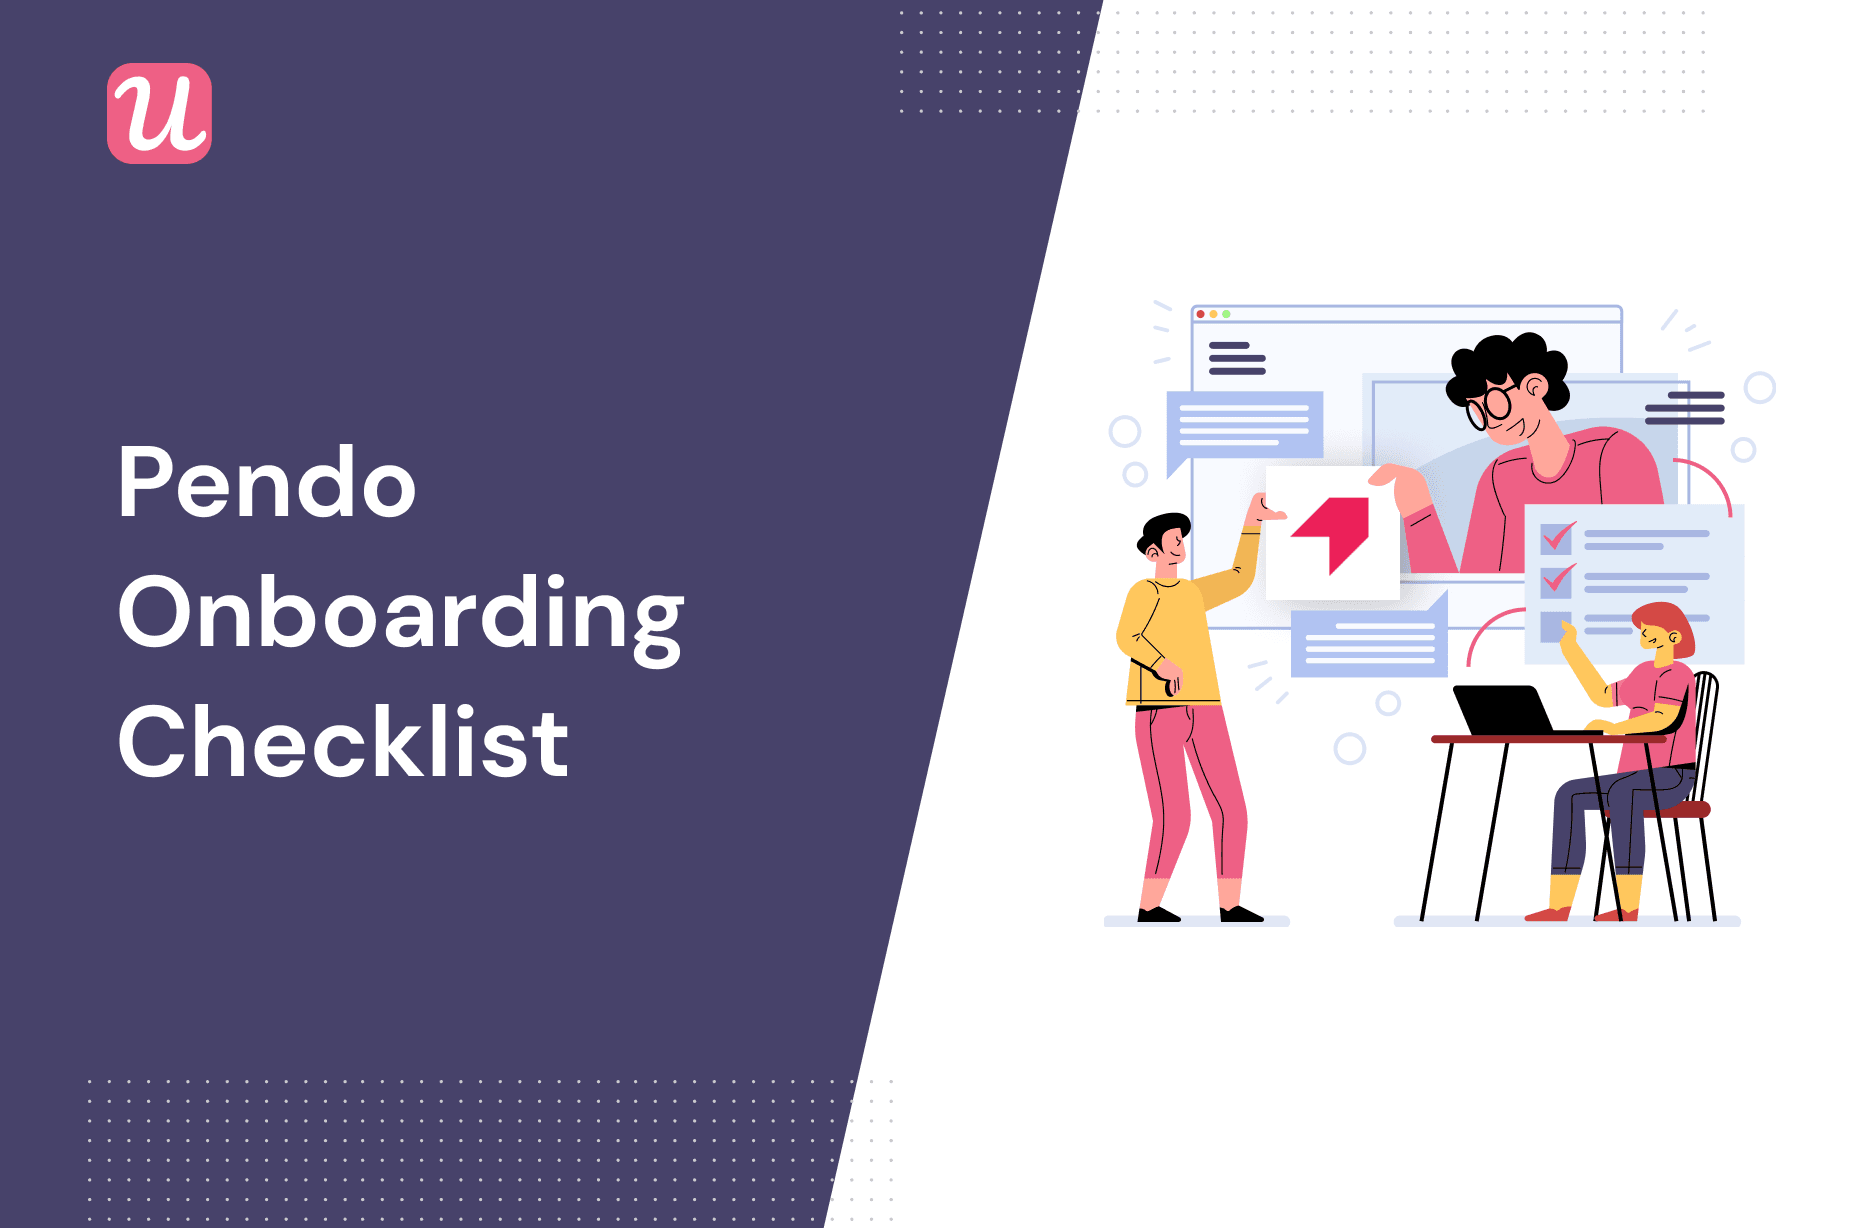 How Does a Pendo Onboarding Checklist Work?